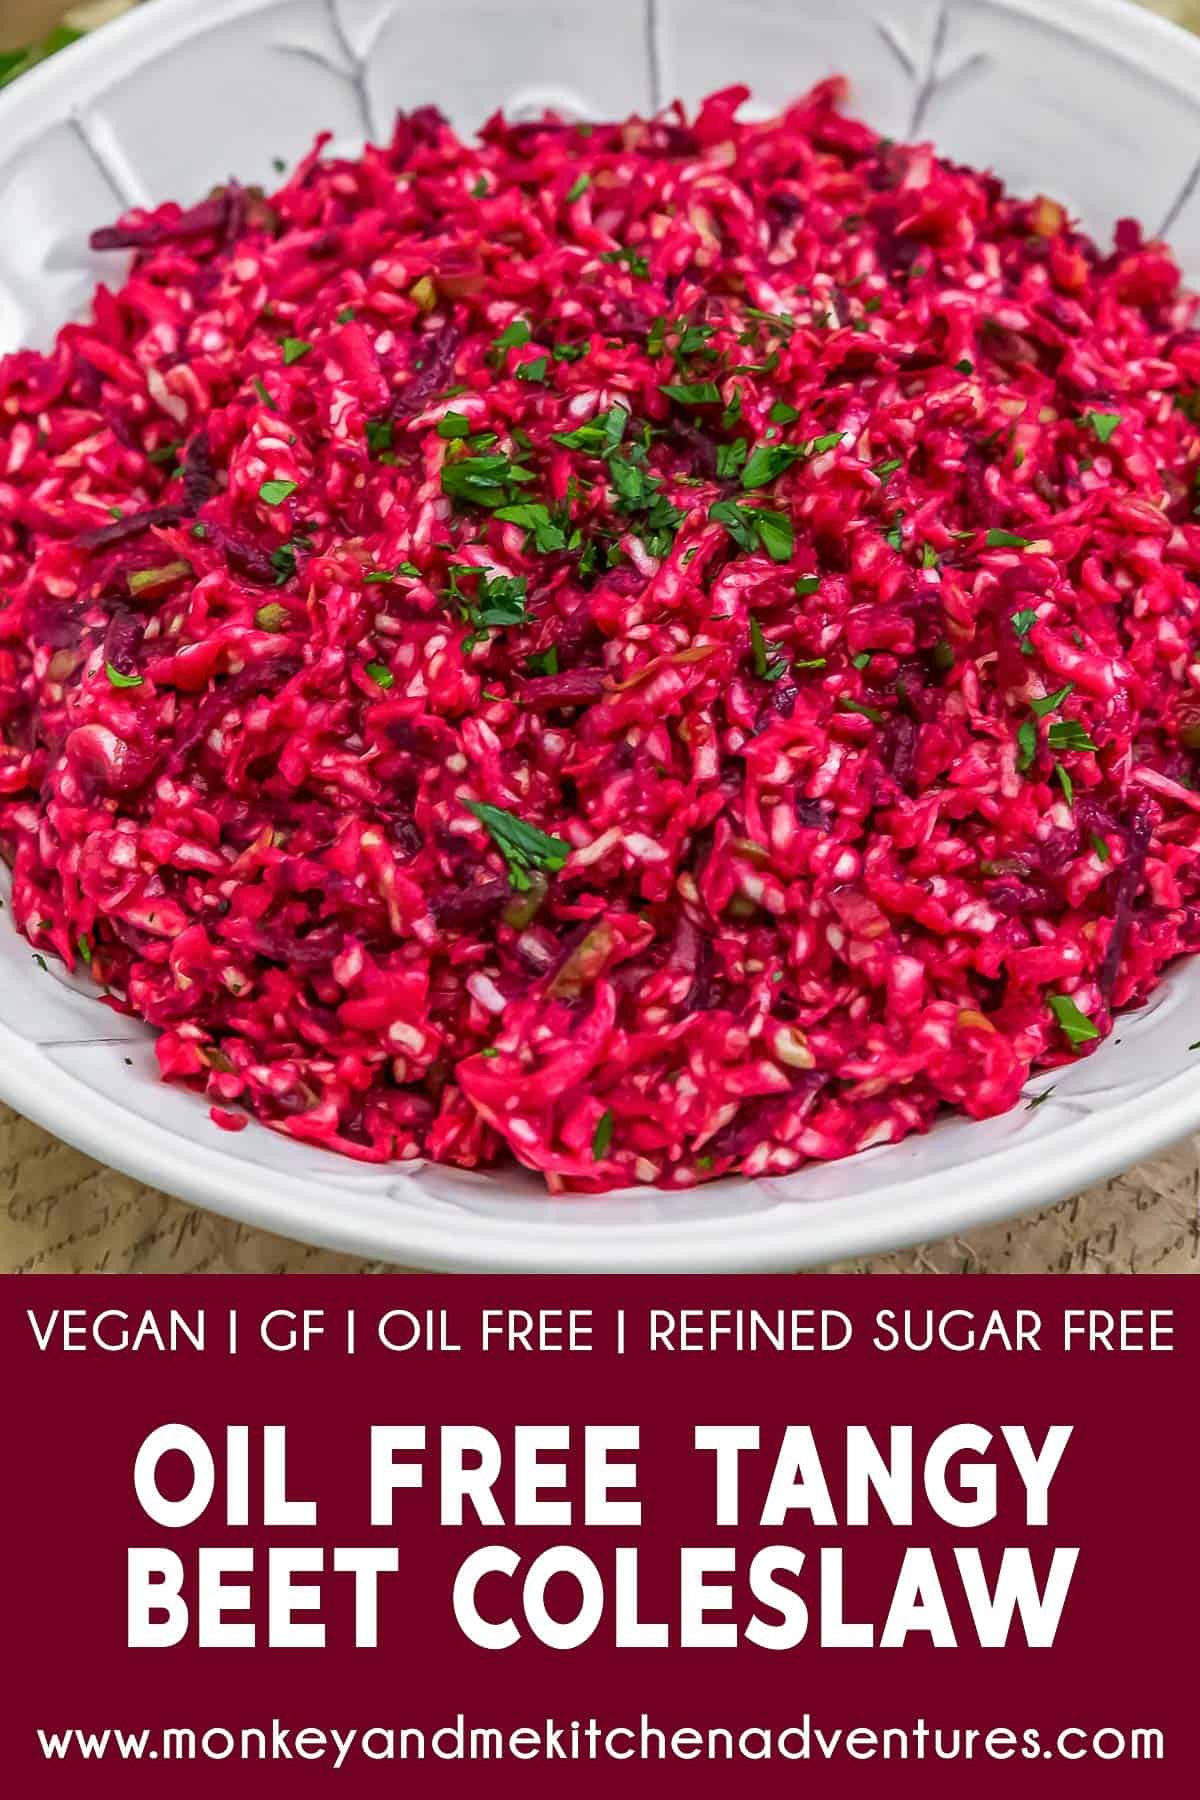 Oil Free Tangy Beet Coleslaw with Text Description